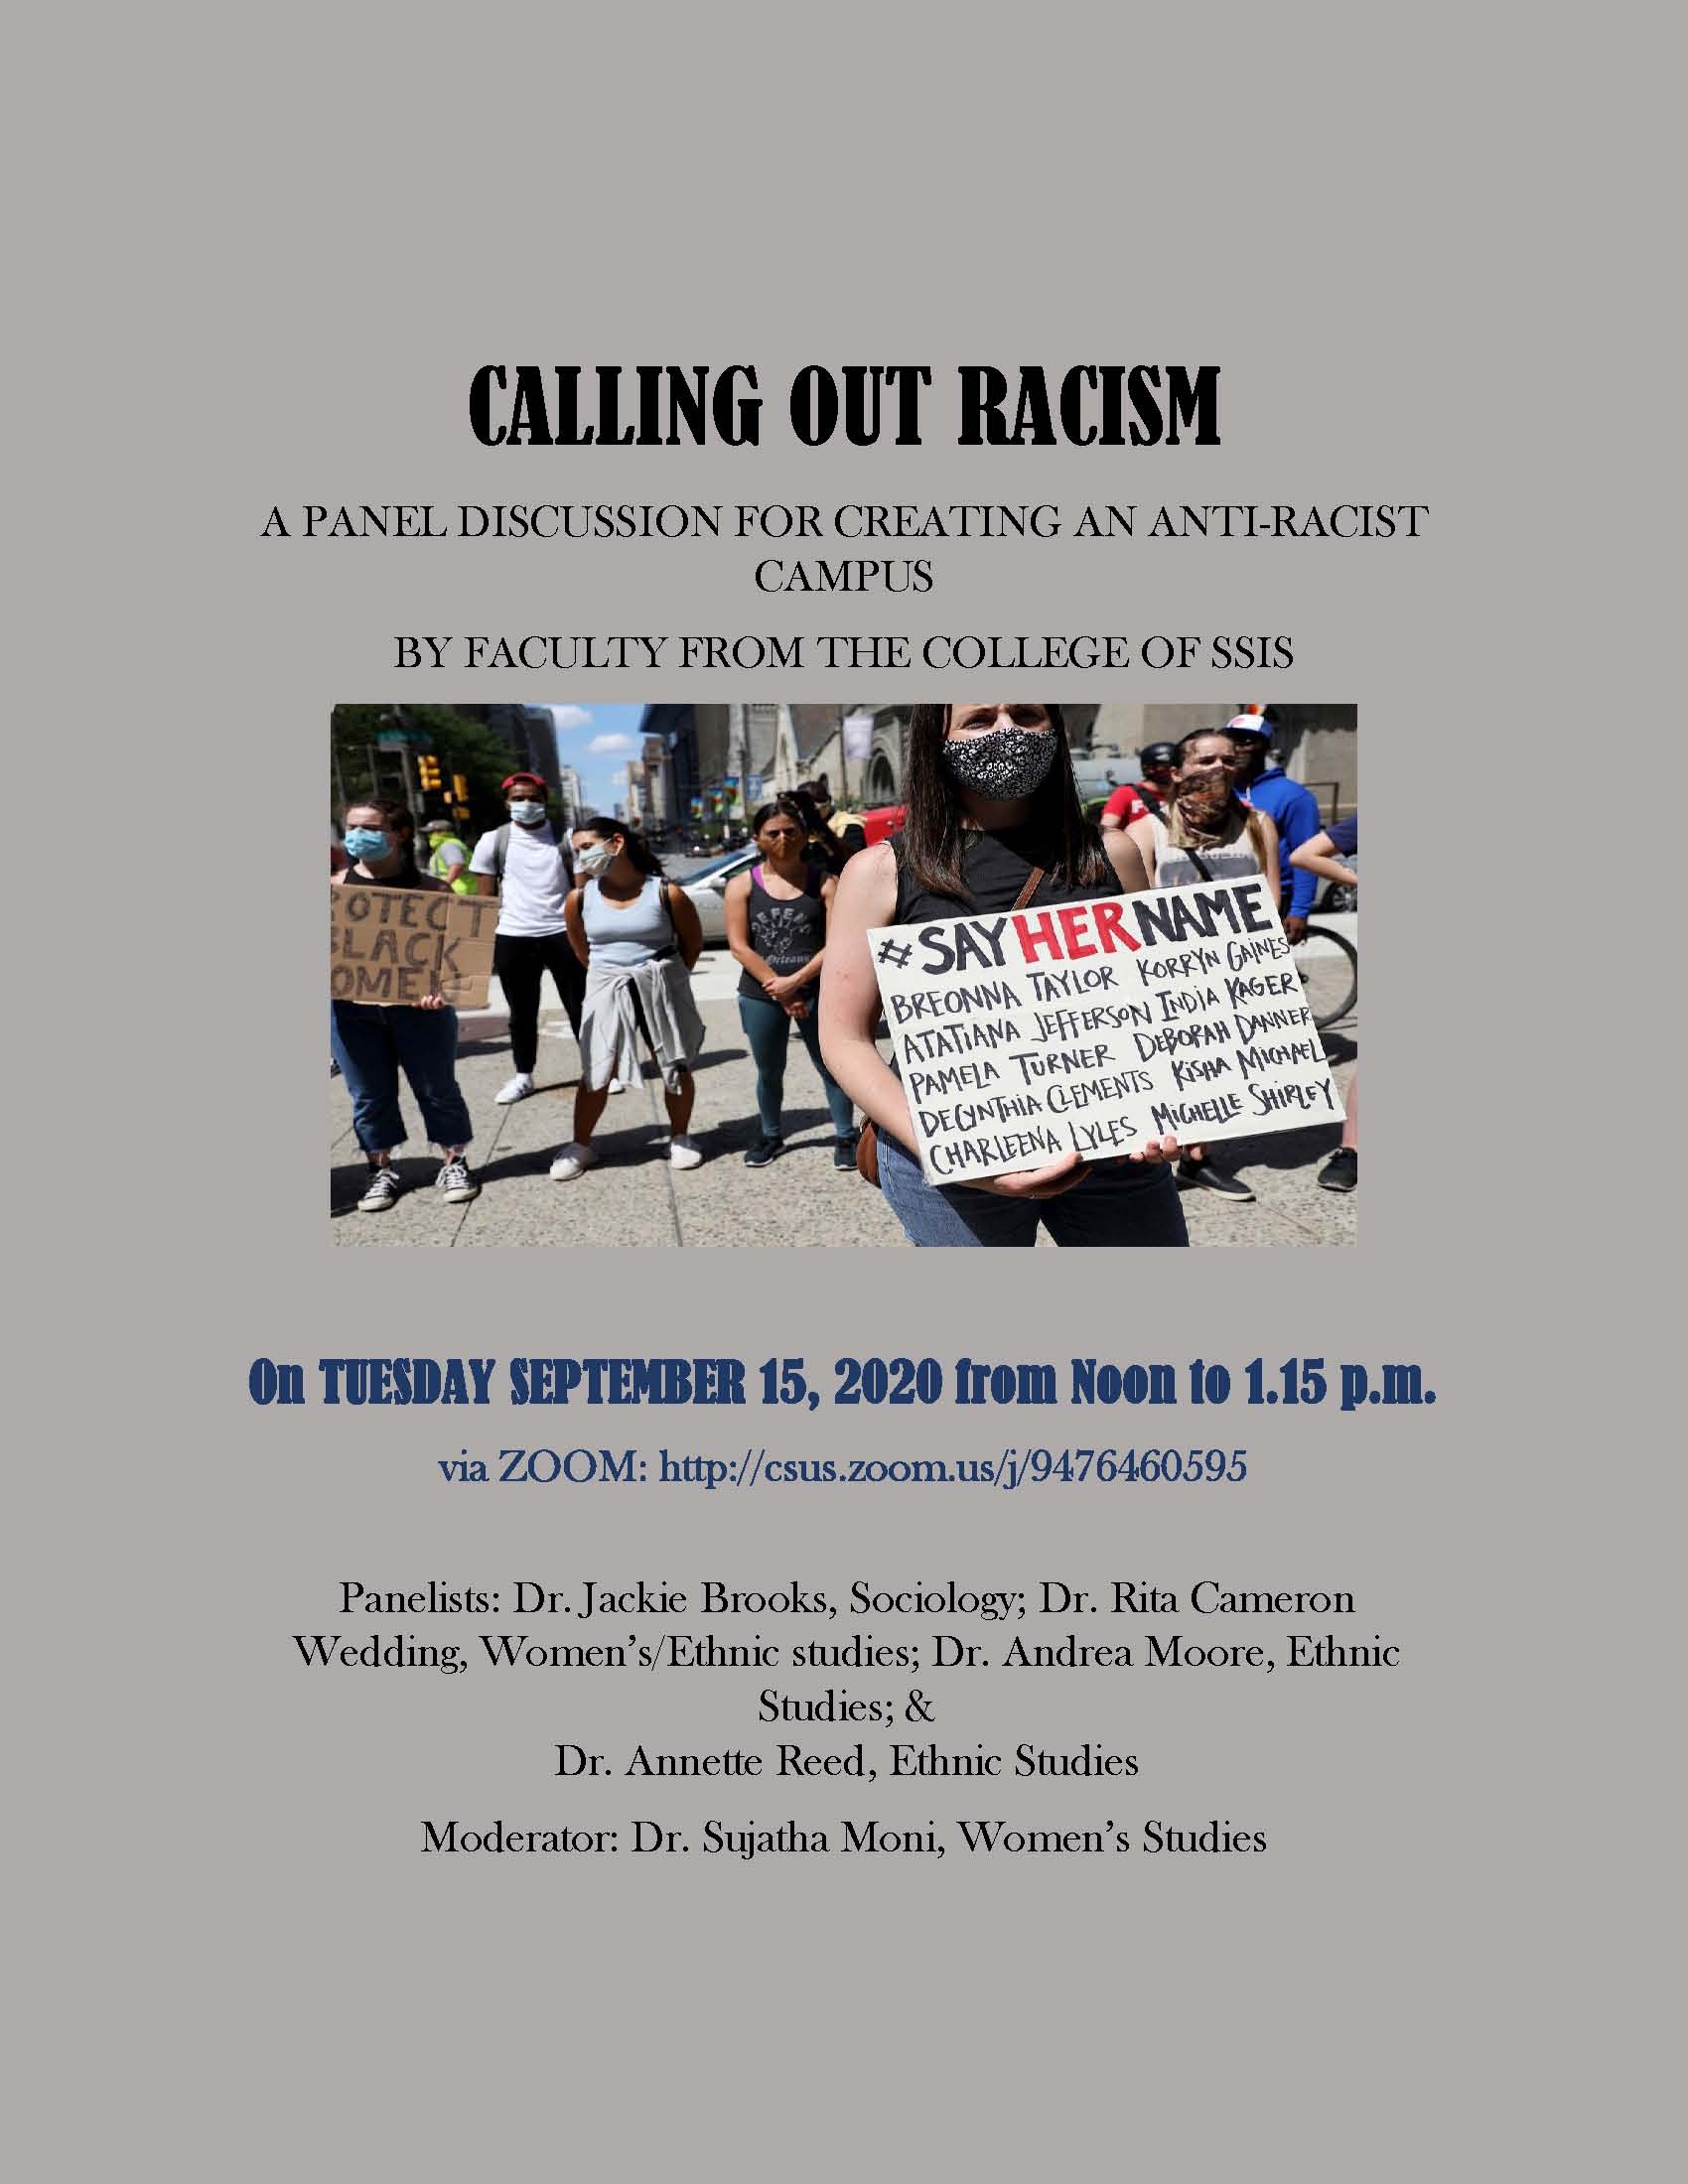 Calling Out Racism flyer